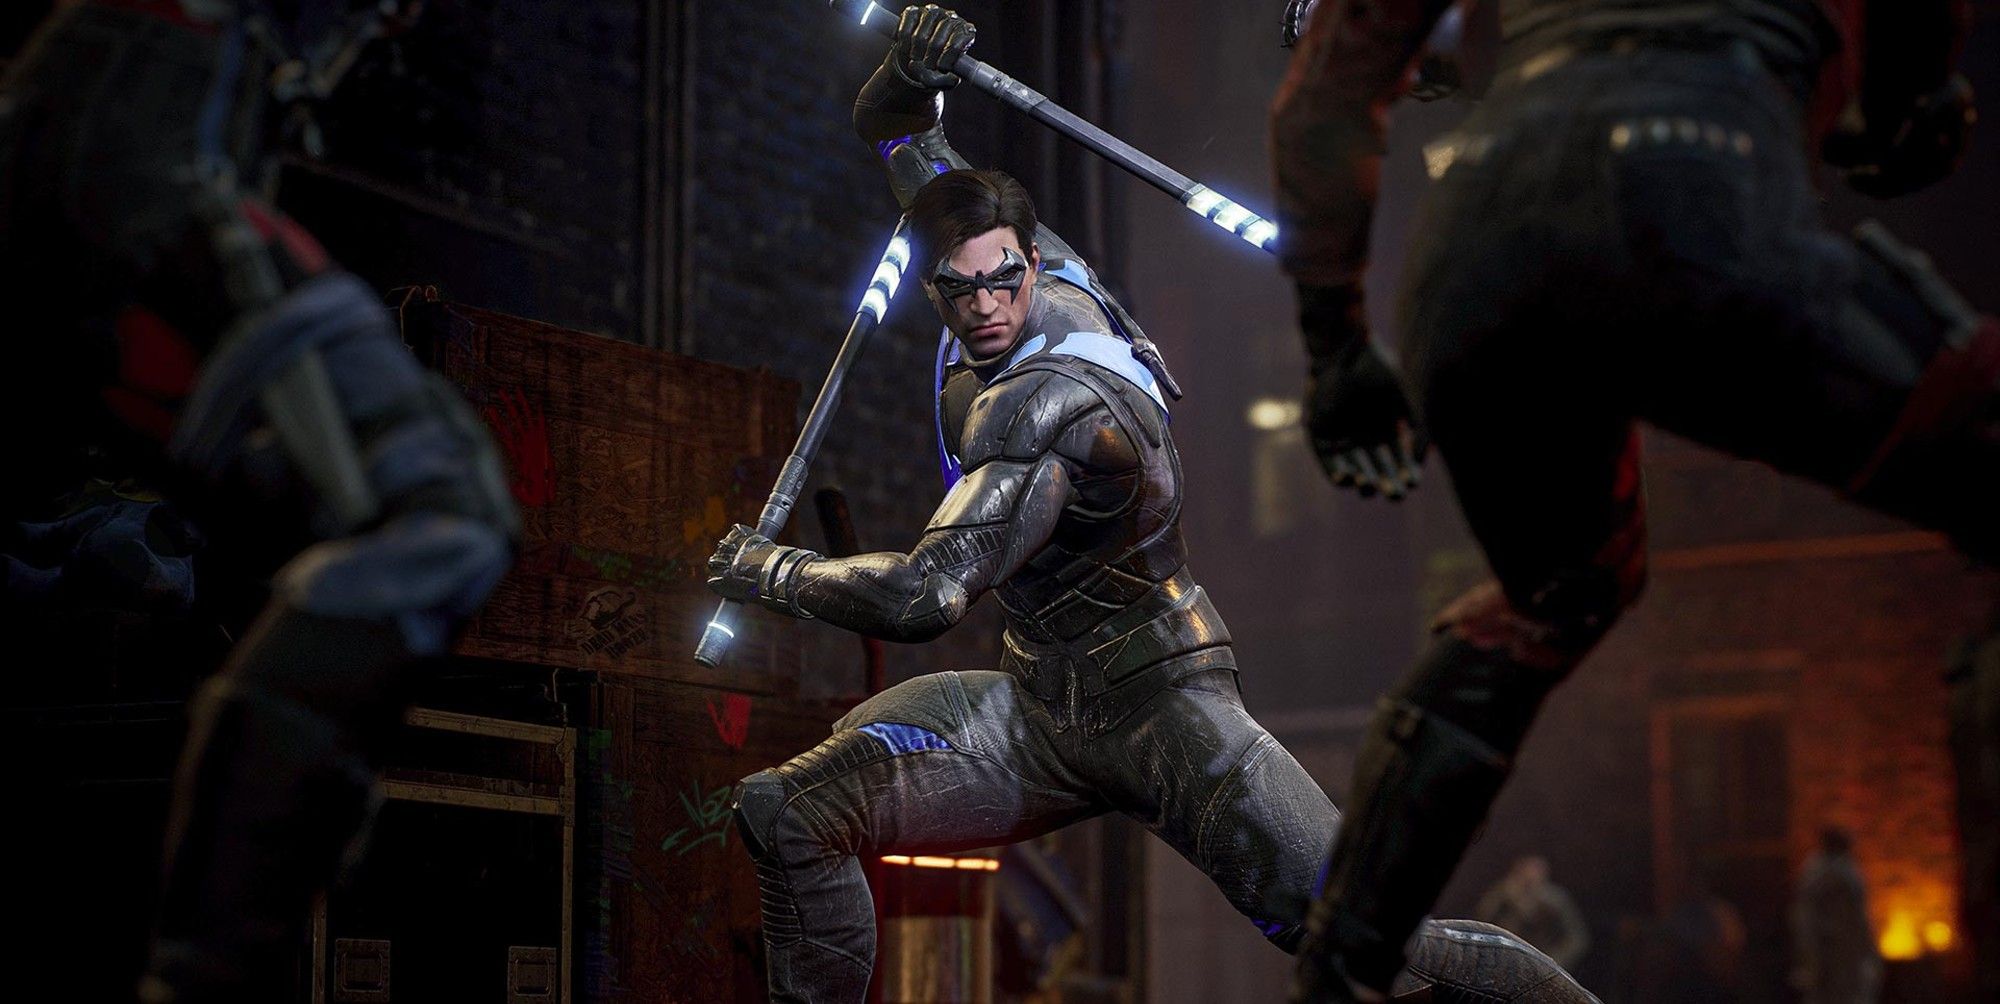 Gotham Knights Multiplayer: Does it Have Crossplay, Local Co-Op, Online  Co-Op? - GameRevolution